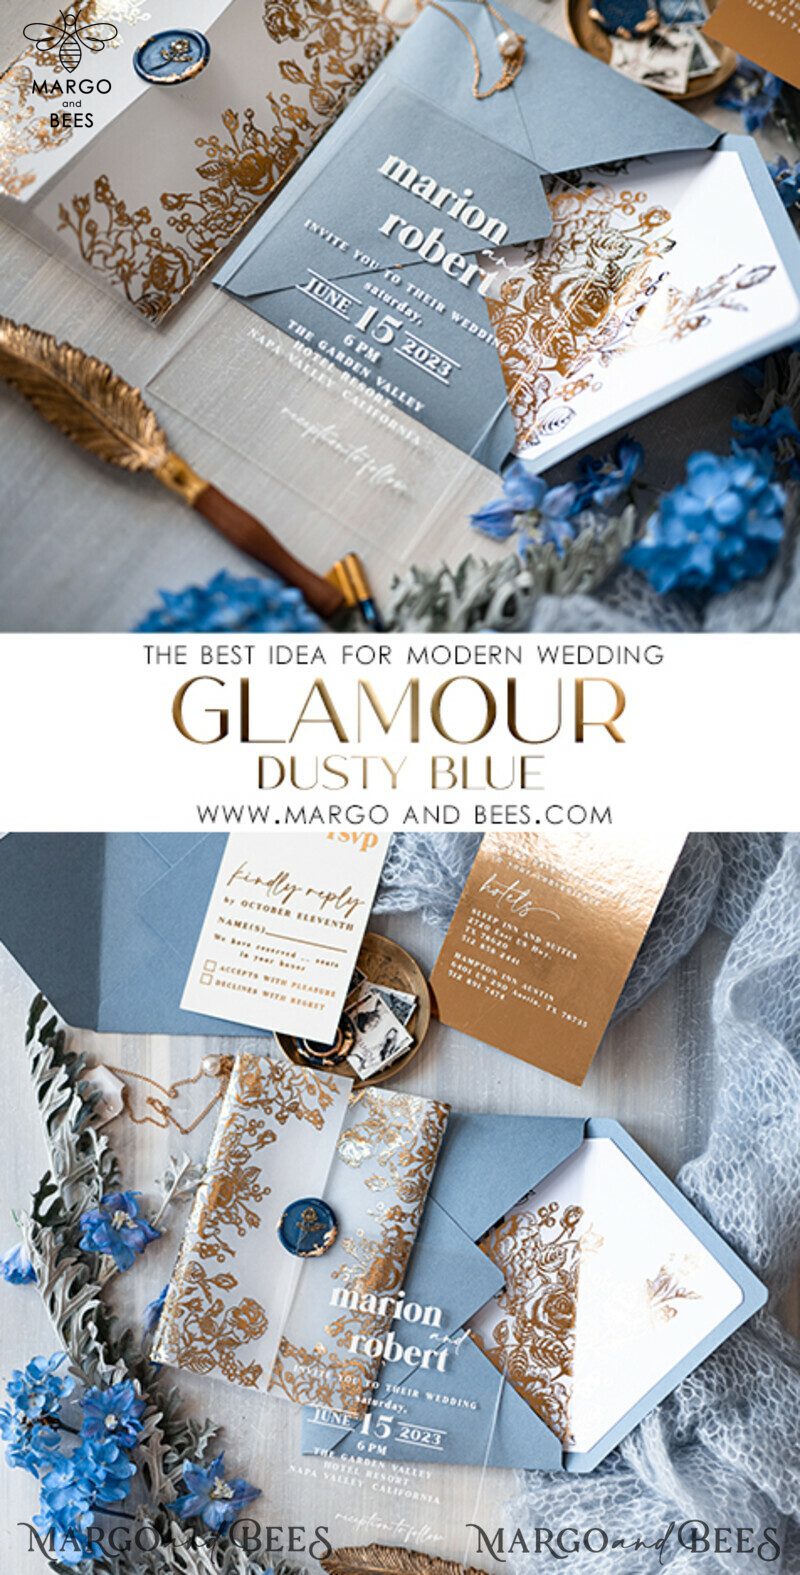 Elegant Bespoke Acrylic Ice Blue Wedding Invitations with Glamour Dusty Blue Accents and Modern Golden Plexi Suite, Adorned with Boho Glam Wedding Cards and Wax Seal-7